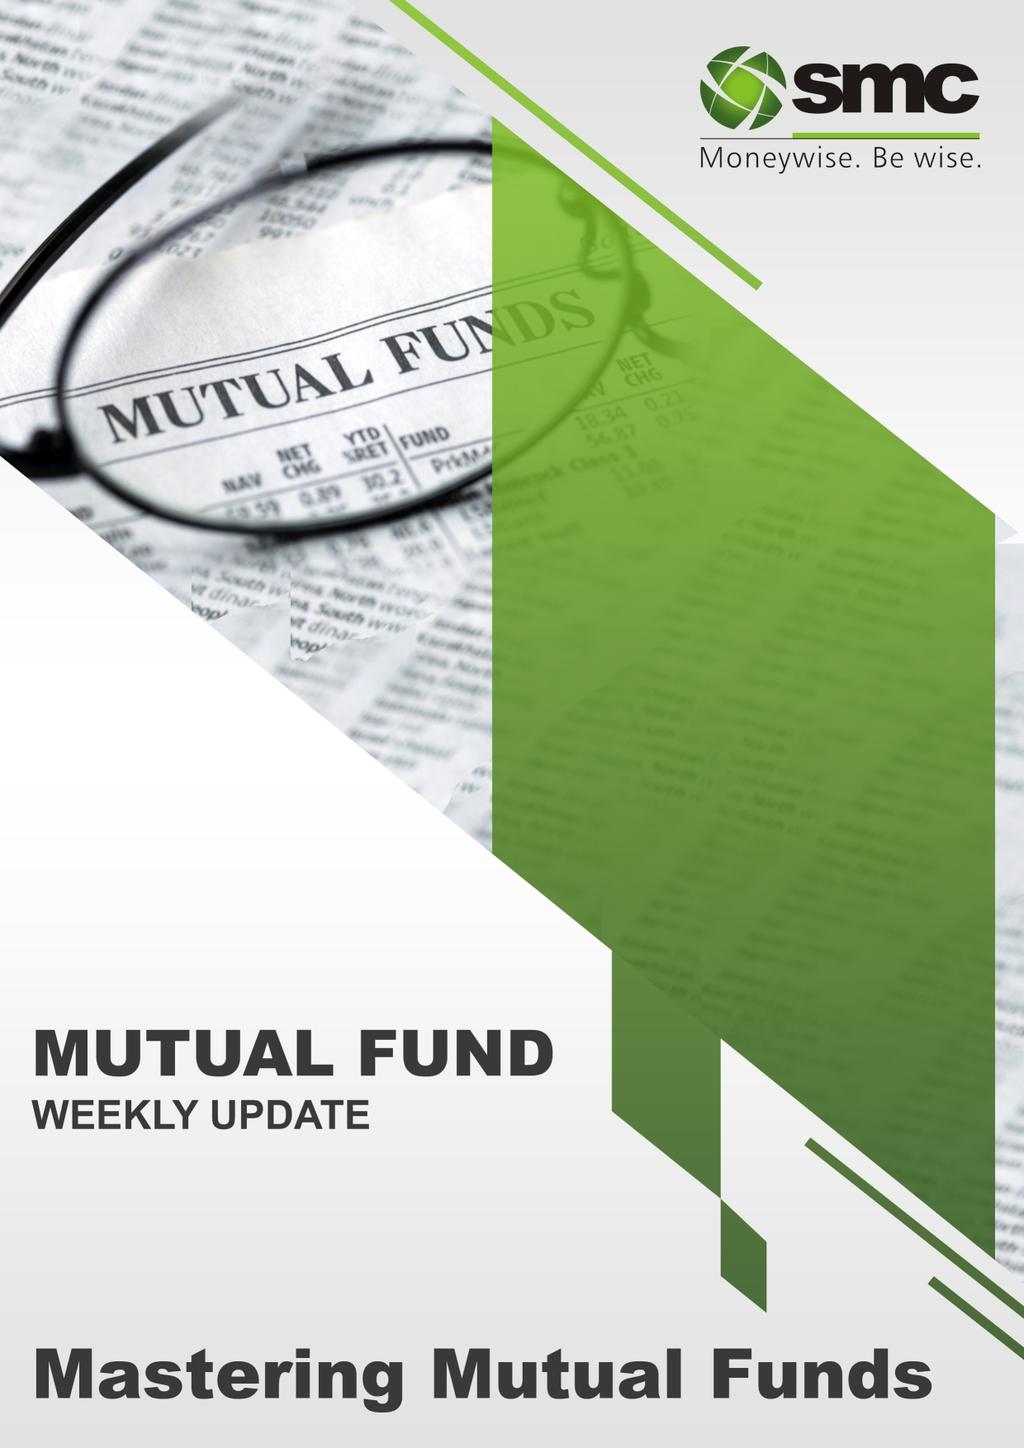 CONTENTS Industry & Fund Update 1 Dividend Declared 2 New Fund Offers 3 Performance of Equity Funds 4